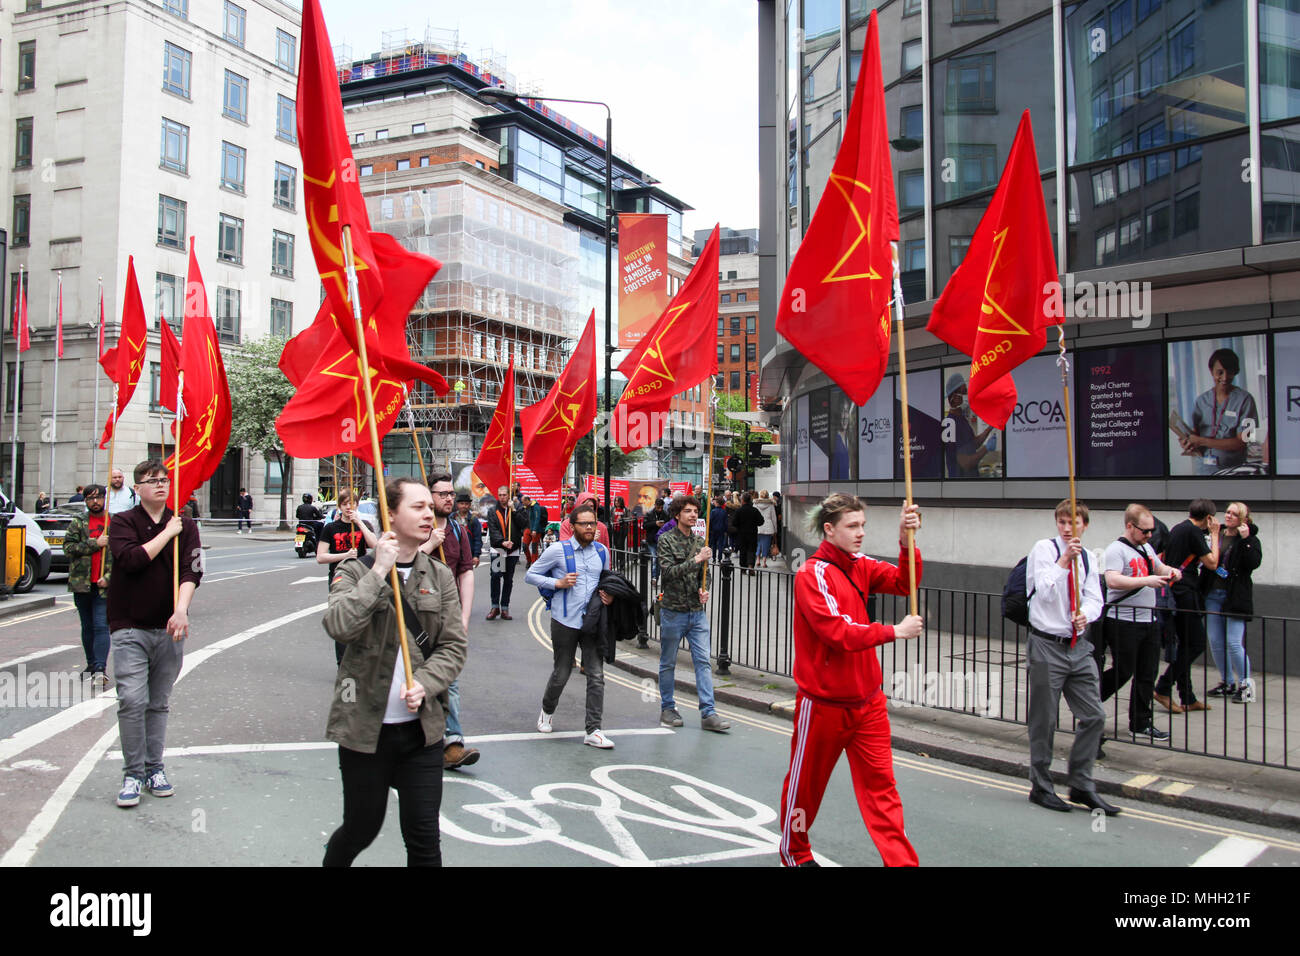 London, UK. 1st May 2018. Communist Party of Great Britain (Marxist-Leninist) at Mayday Credit: Alex Cavendish/Alamy Live News Stock Photo